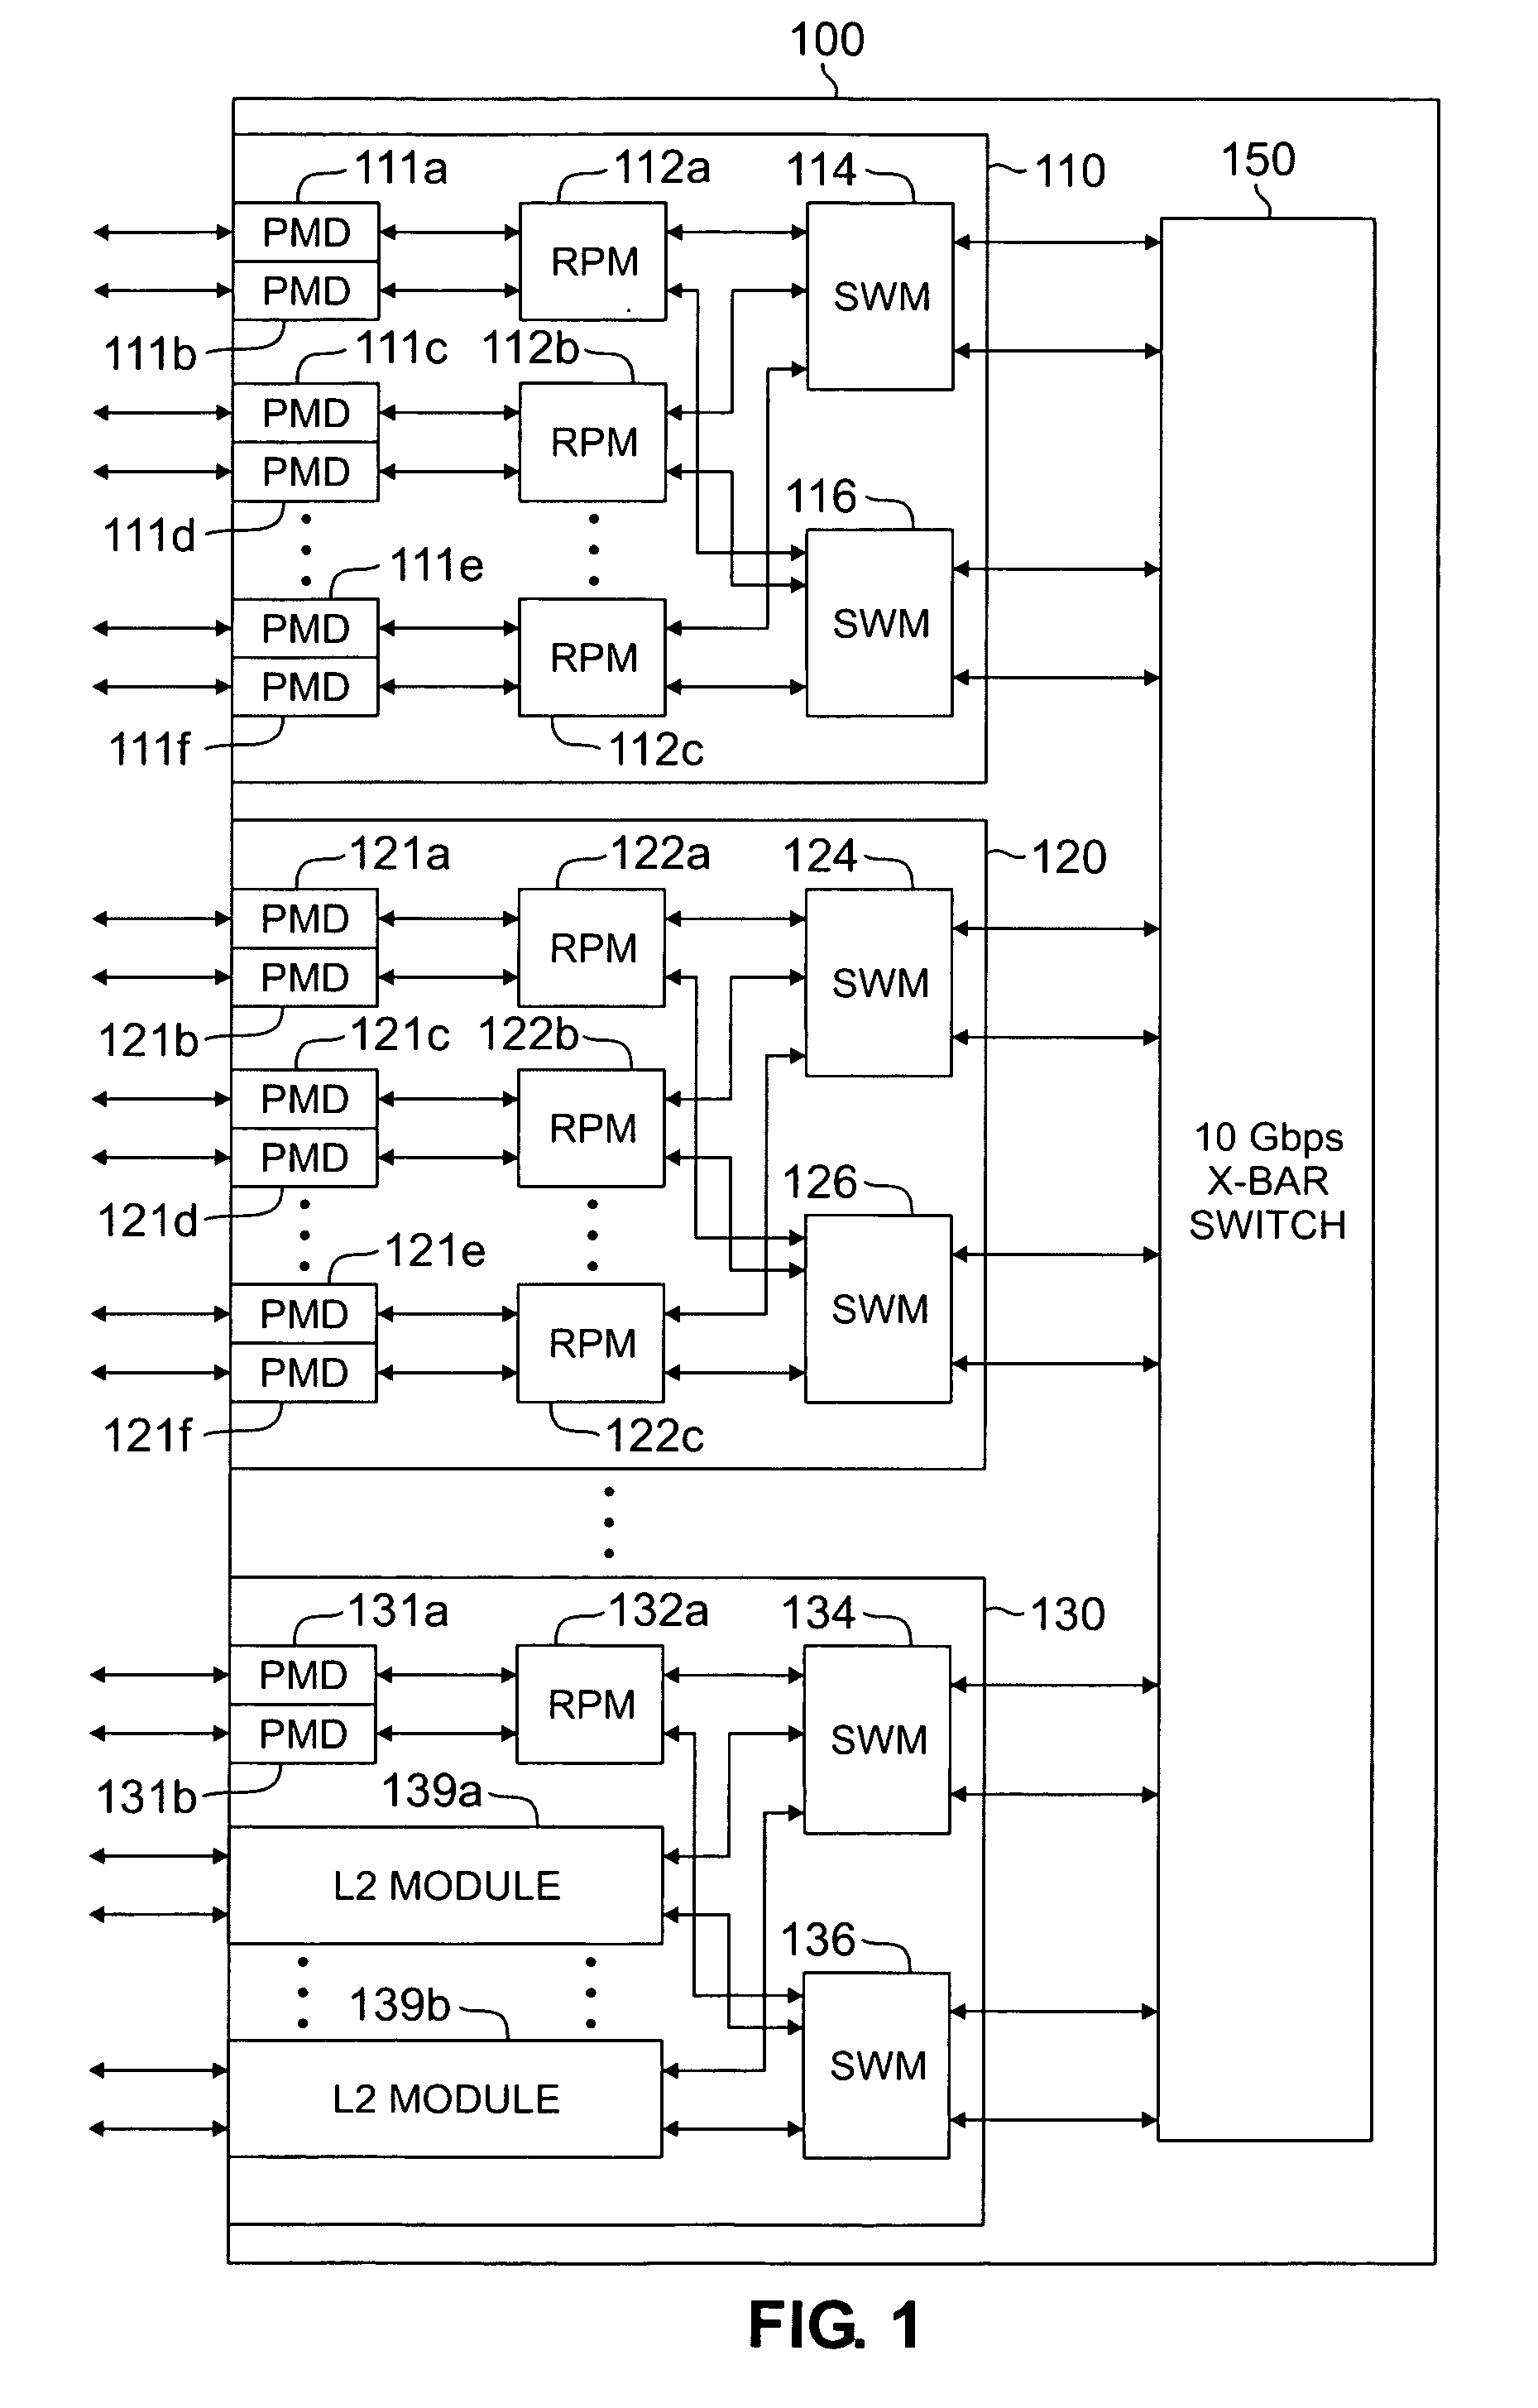 Apparatus and method for performing security and classification in a multiprocessor router